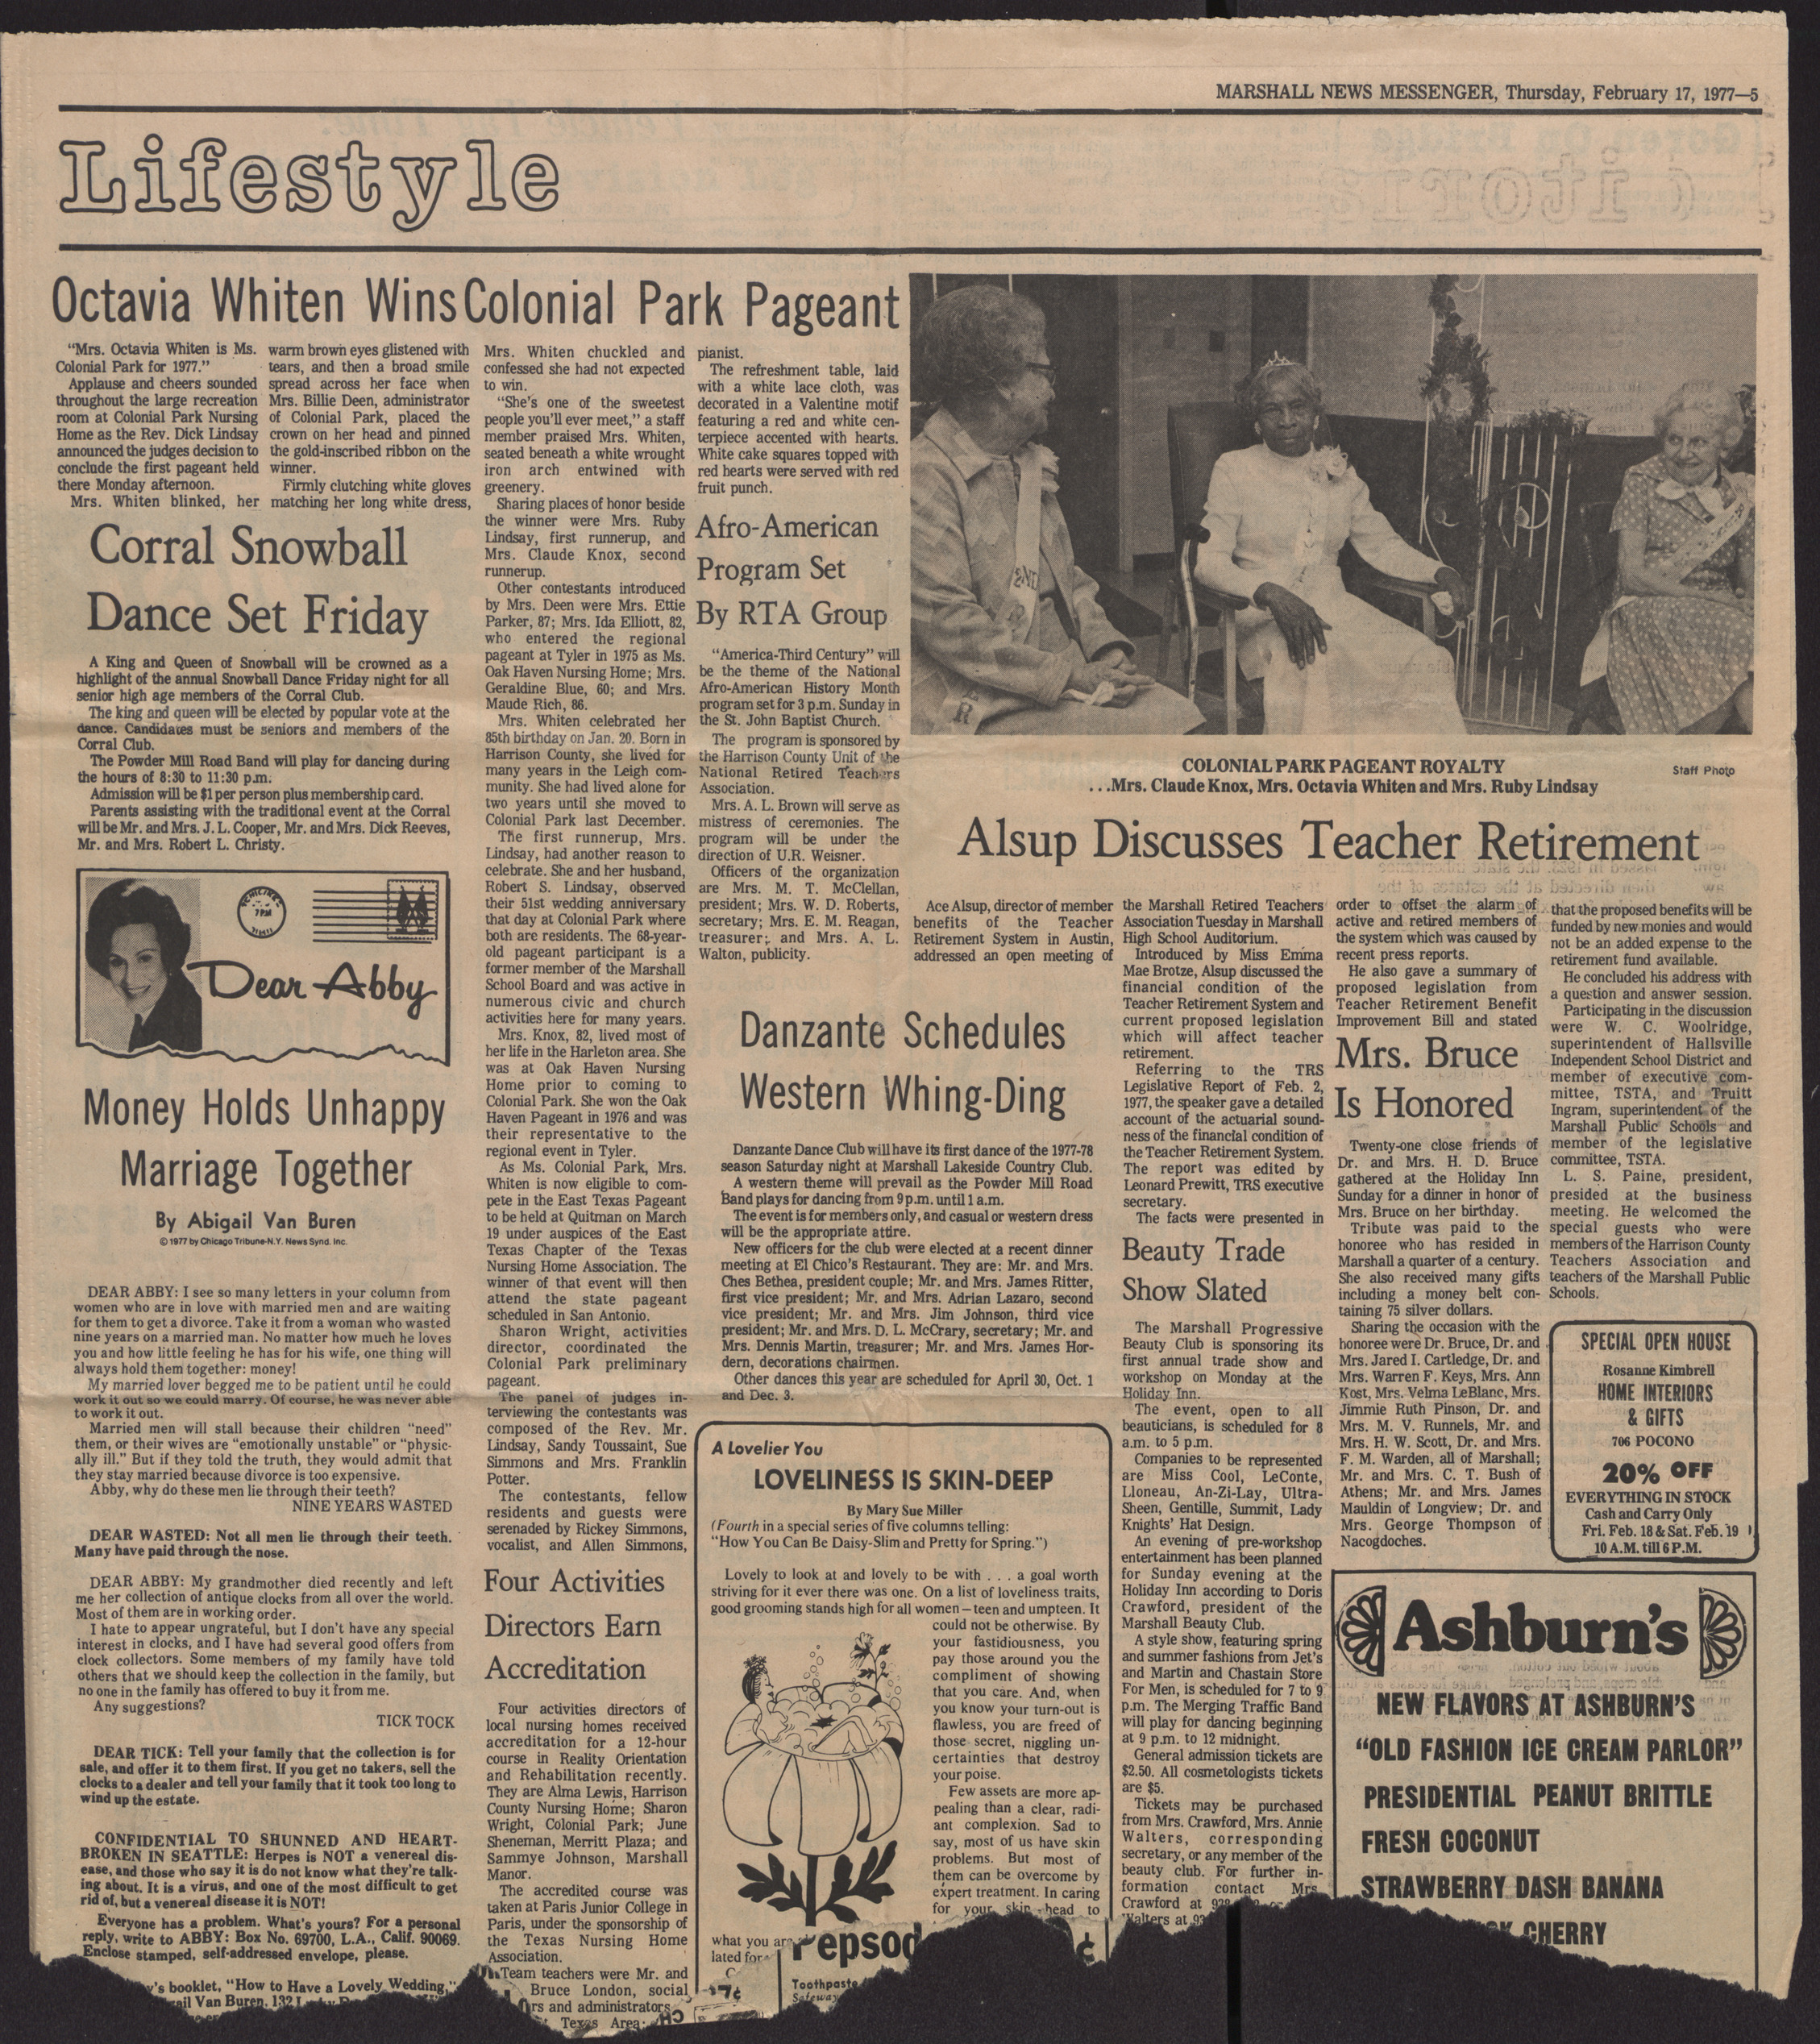 Newspaper clipping, Octavia Whiten Wins Colonial Park Pageant, Marshall News Messenger, February 17, 1977